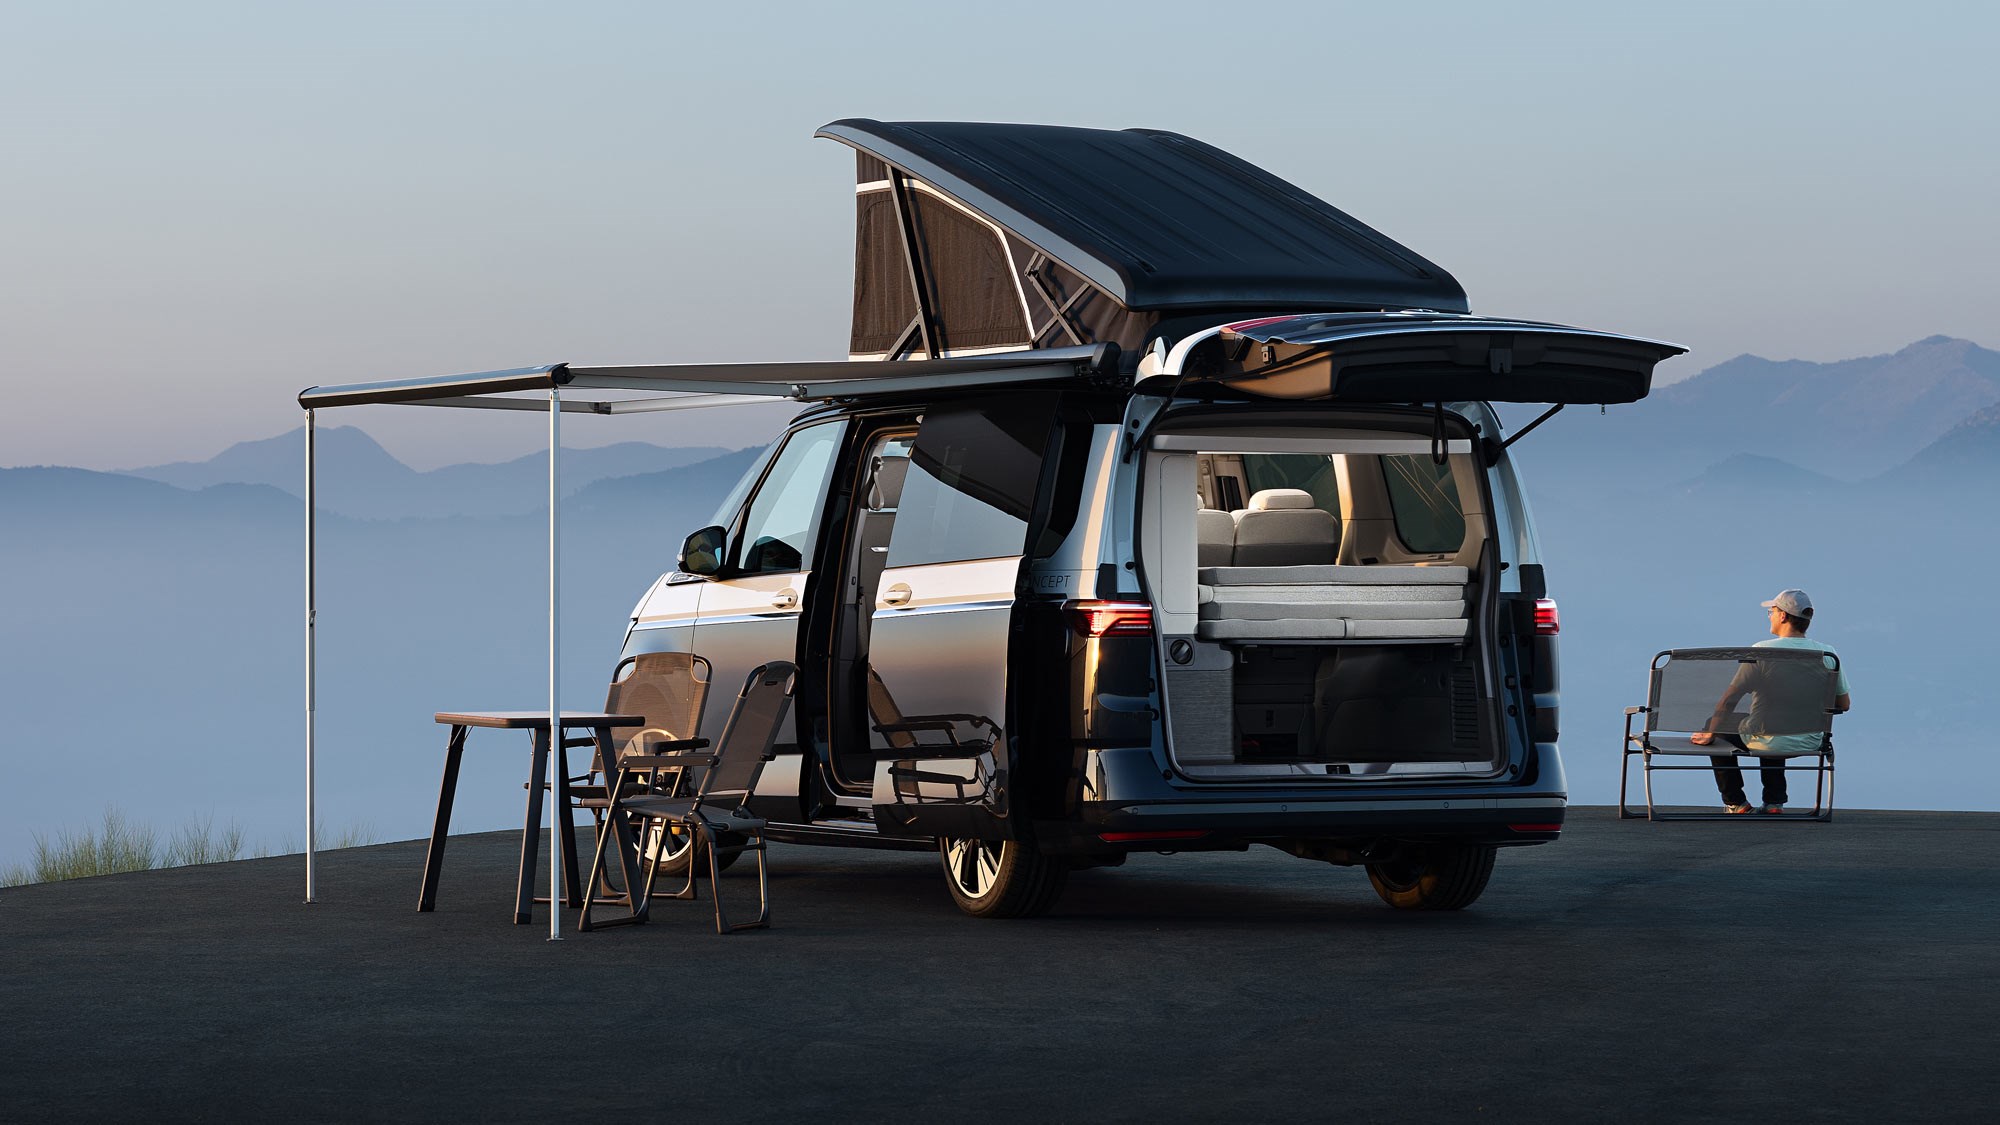 2024 VW California Camper Van Is a Mobile Home Away From Home With